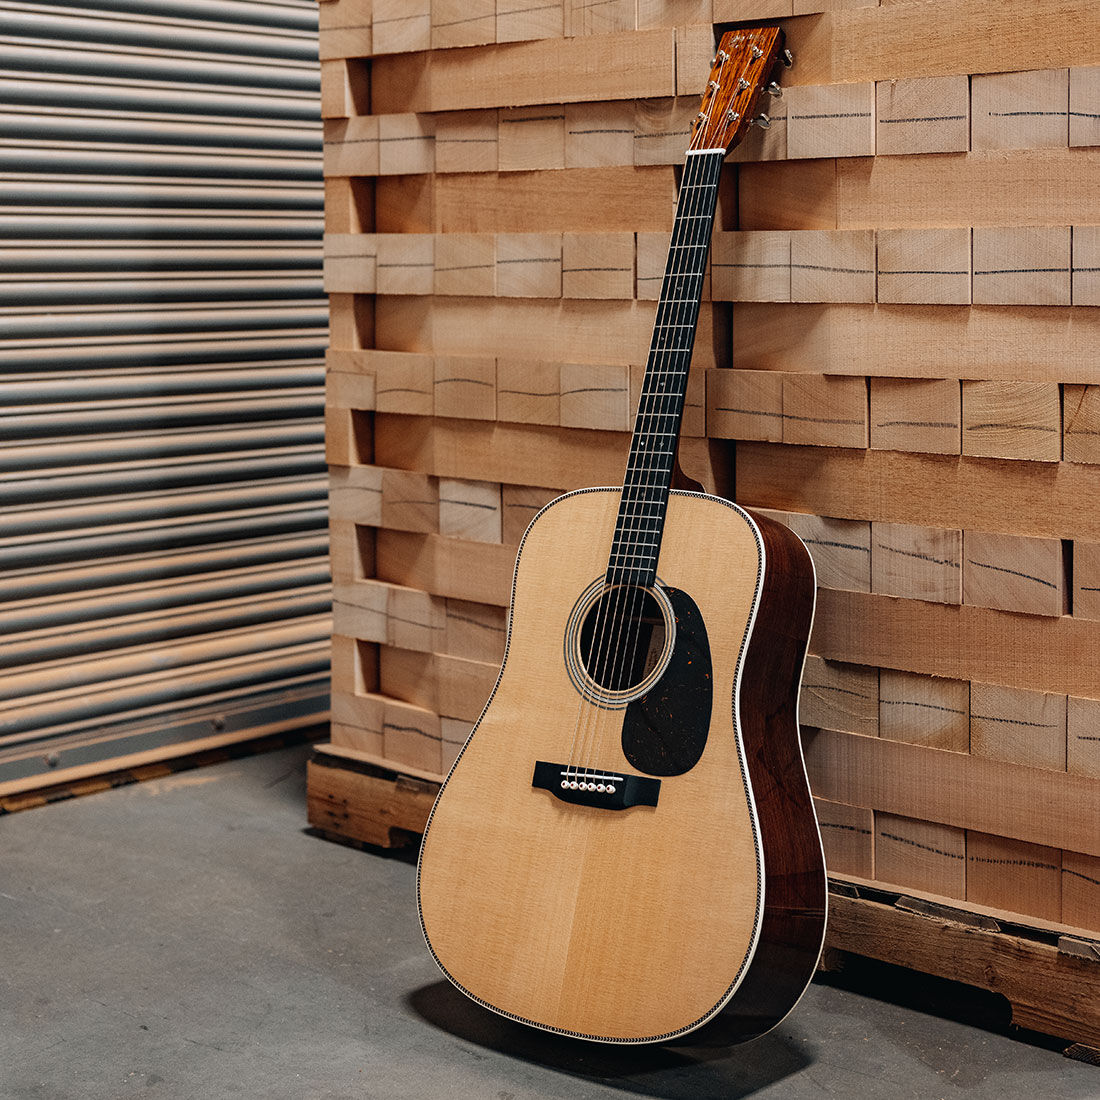 Acoustic guitar standing against a wooden wall